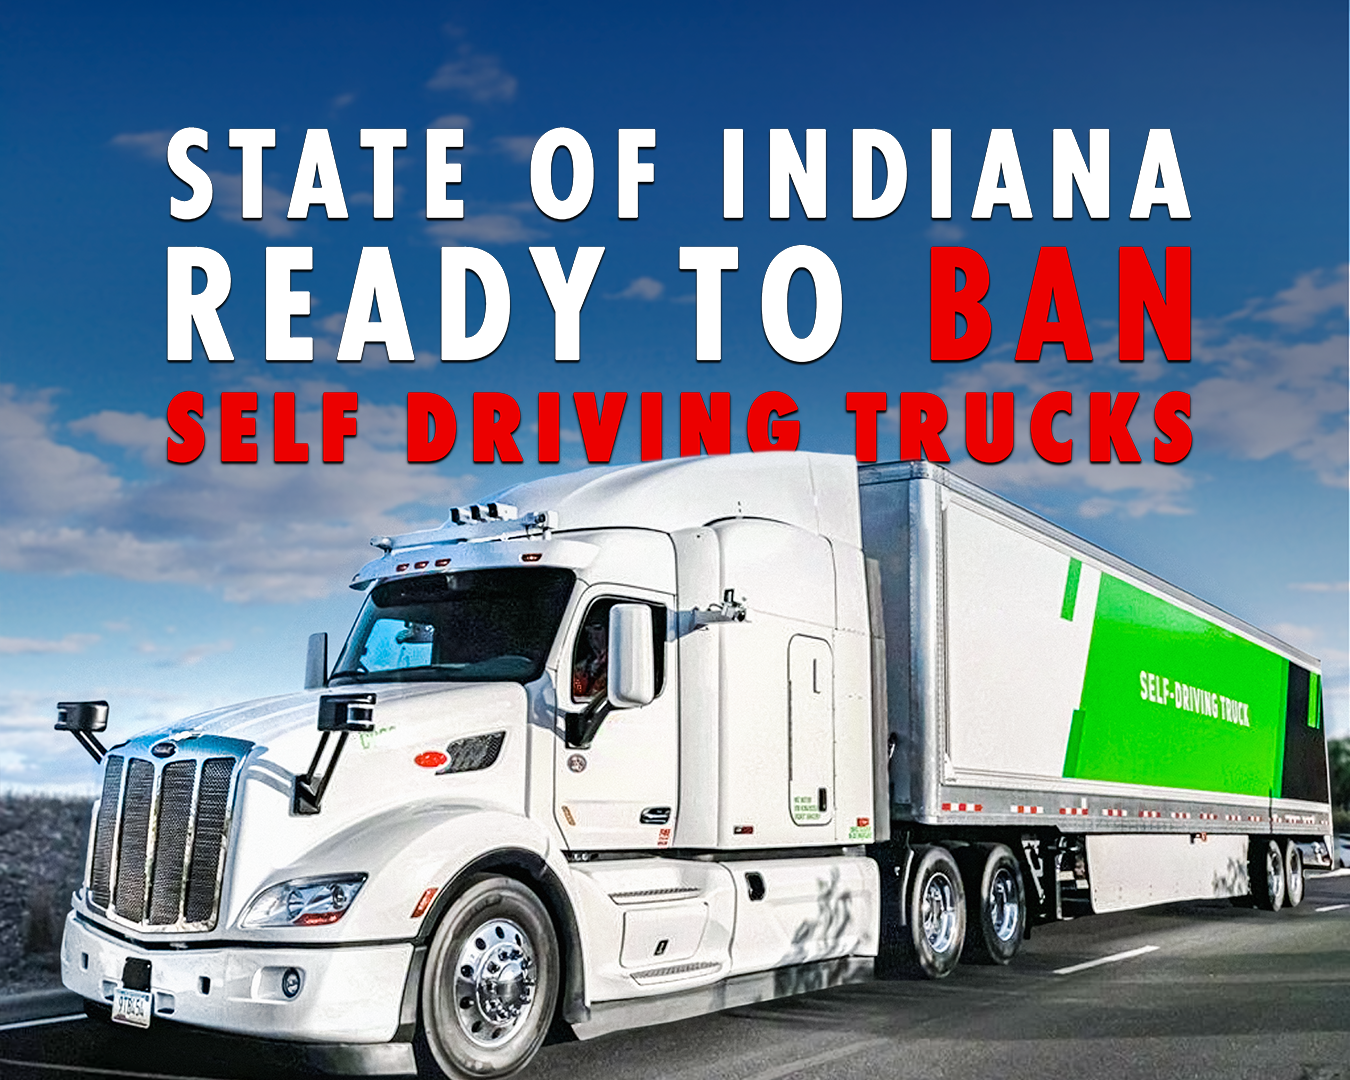 State of Indiana bans self-driving trucks